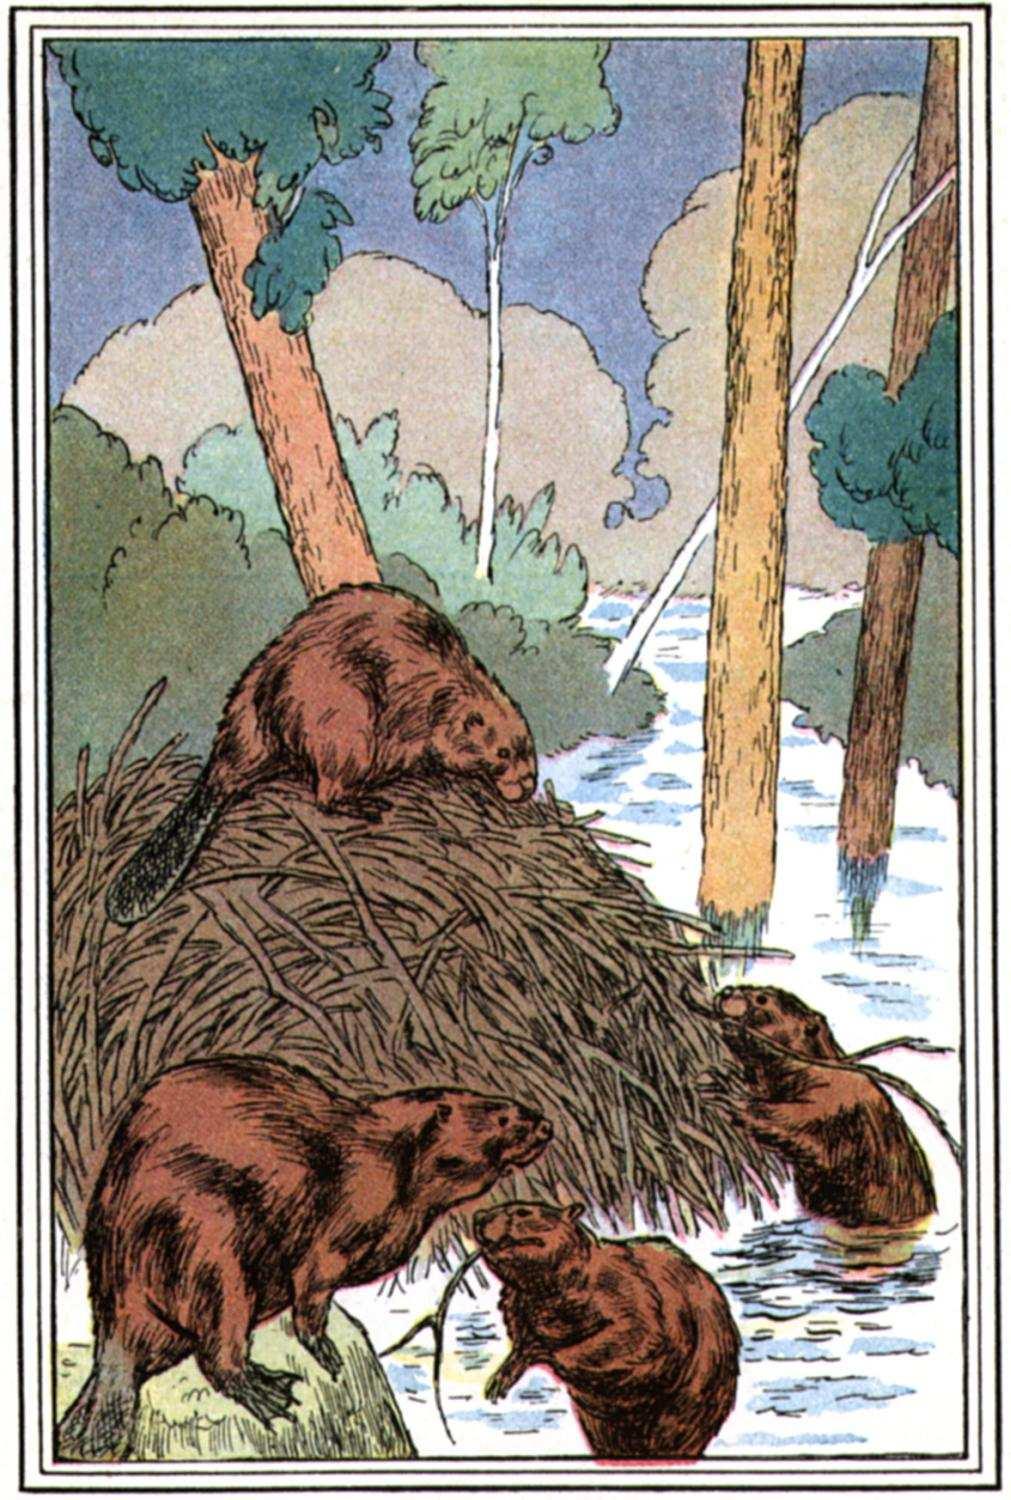 Write about beavers: The